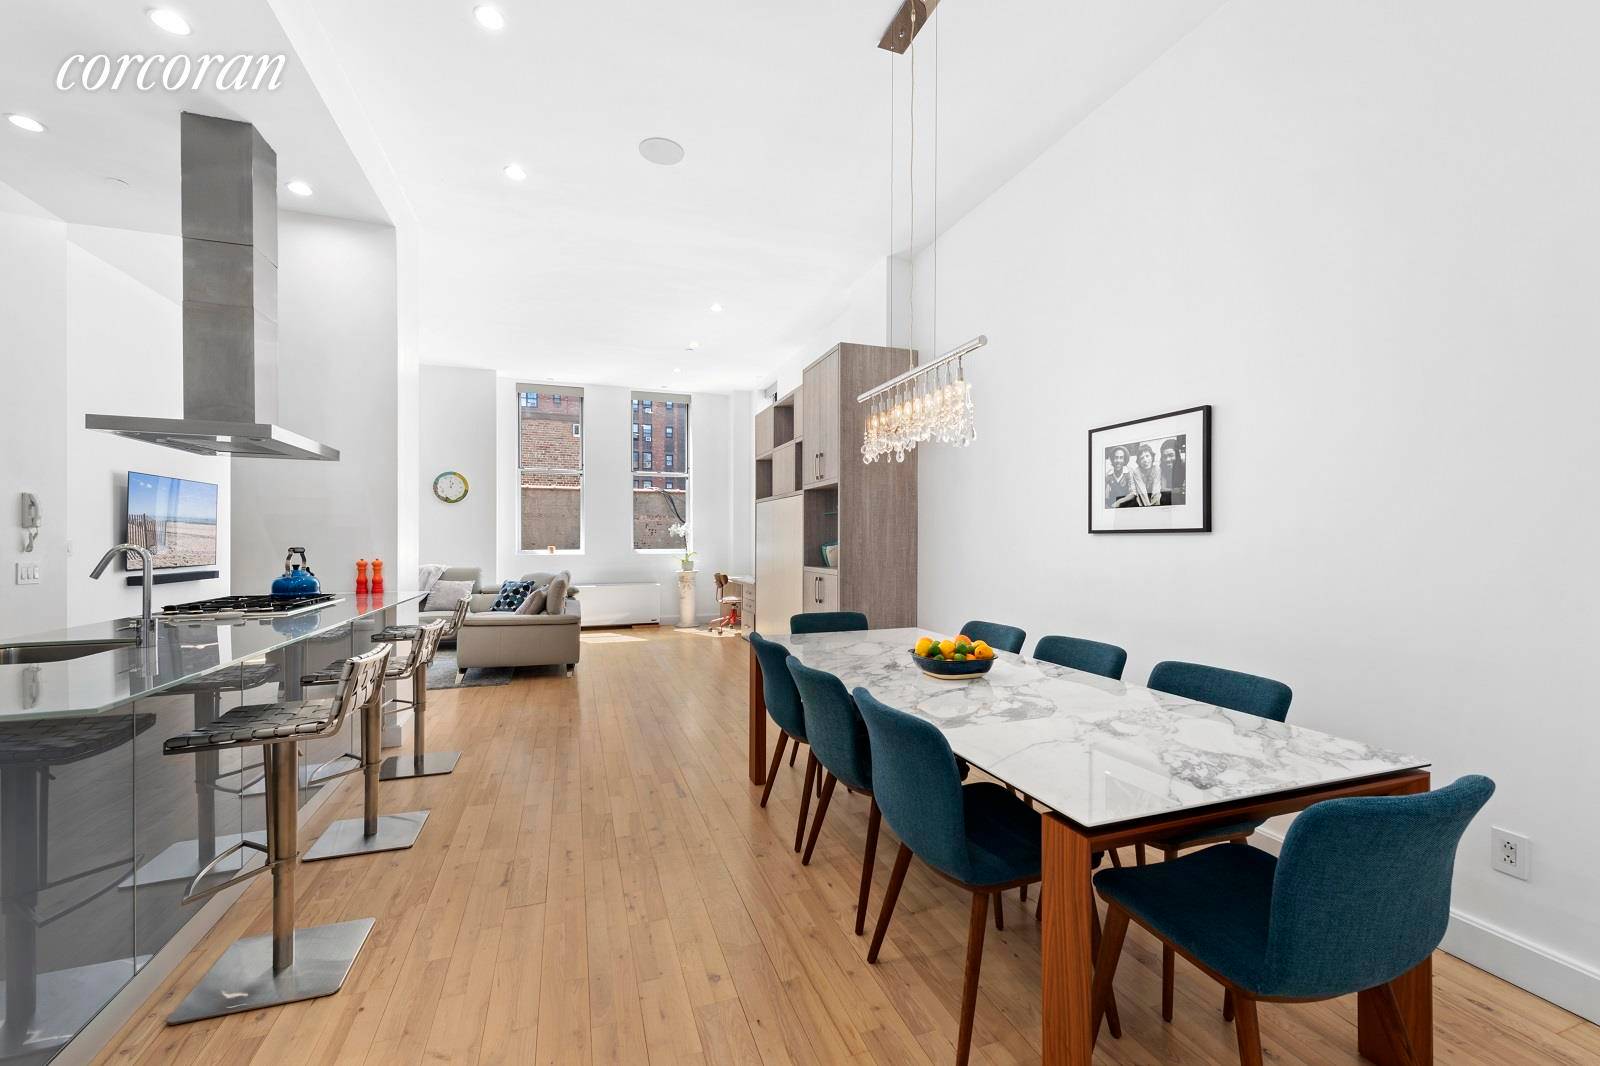 Sunlight energetically surrounds you as you are welcomed into this open and gracious one bedroom two bath loft that features high ceilings, grand windows, ample storage space and warmth beaming ...